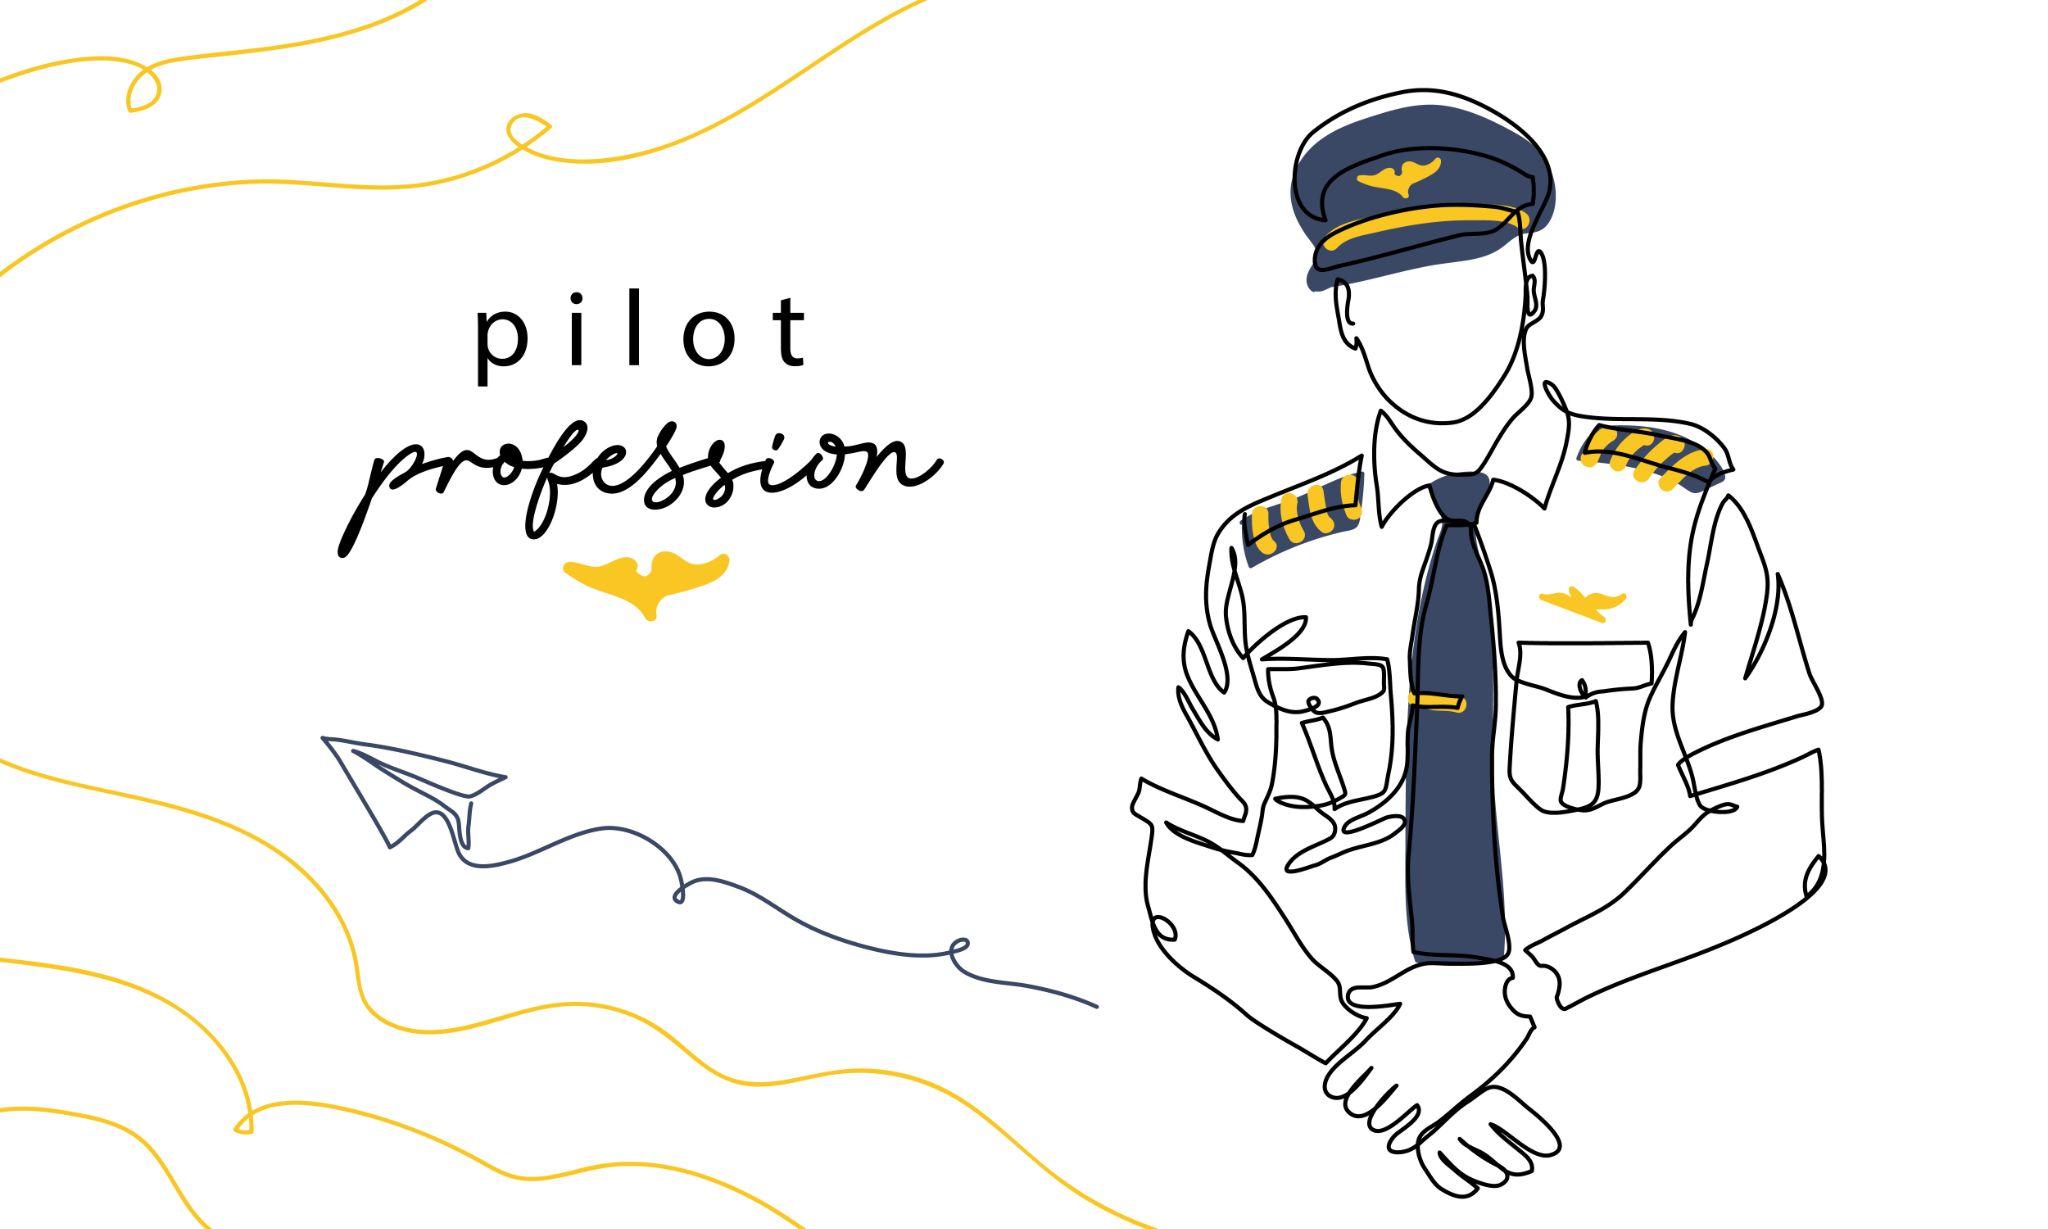 Pilot, aviator profession, man in uniform. Vector background, banner, poster. One continuous line art drawing illustration of pilot.